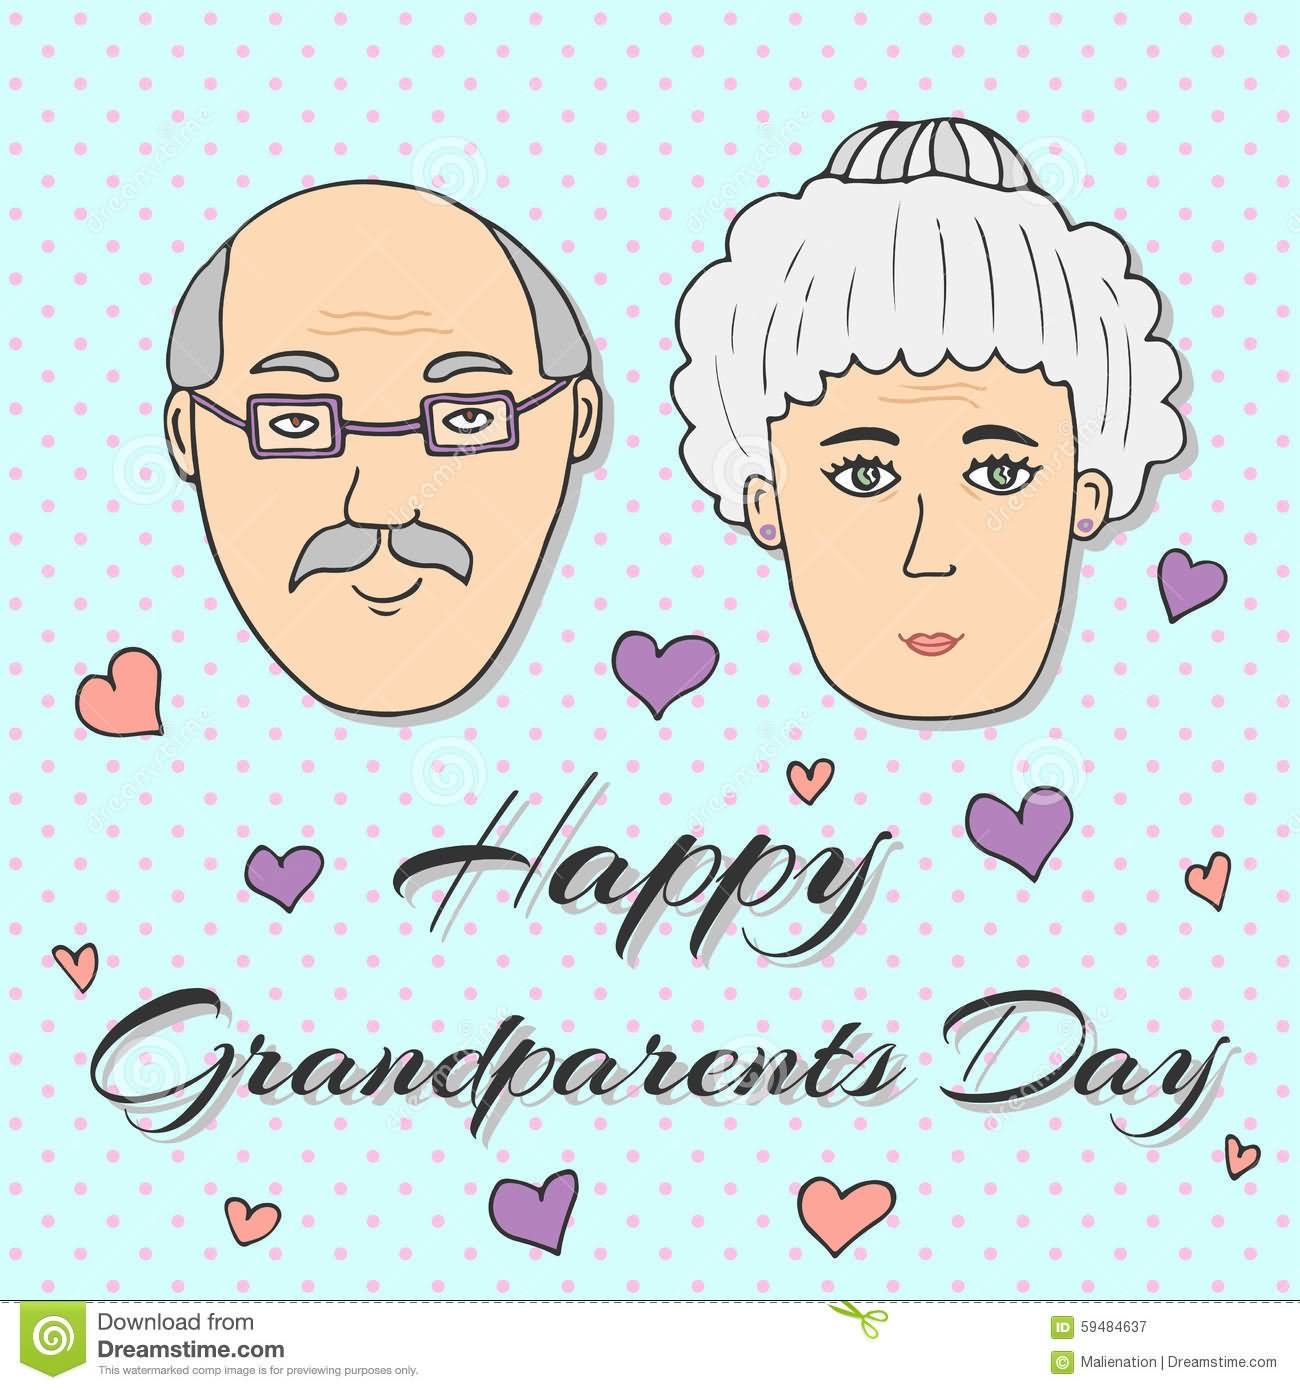 Happy Grandparents Day Greeting Card Image